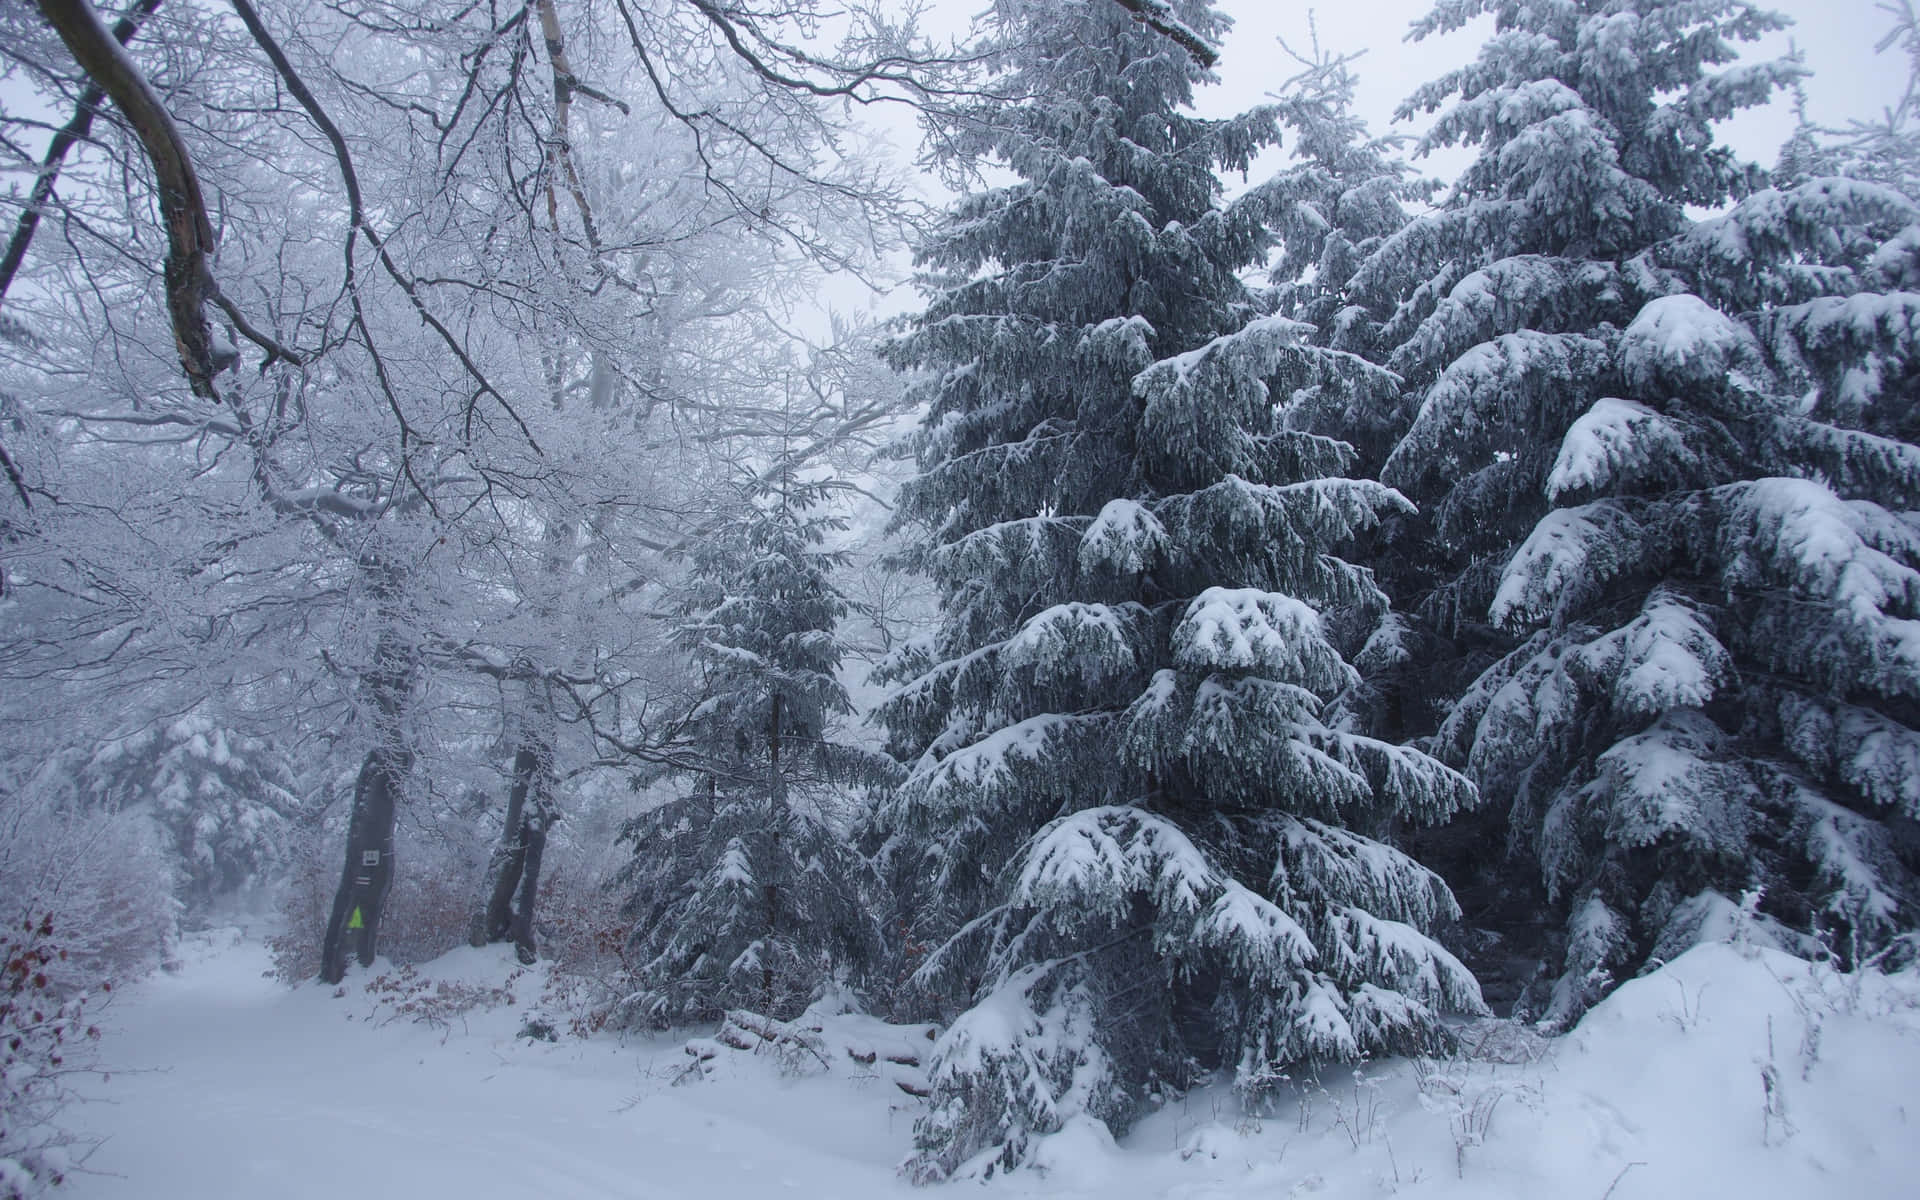 A tranquil snowy forest in the winter.